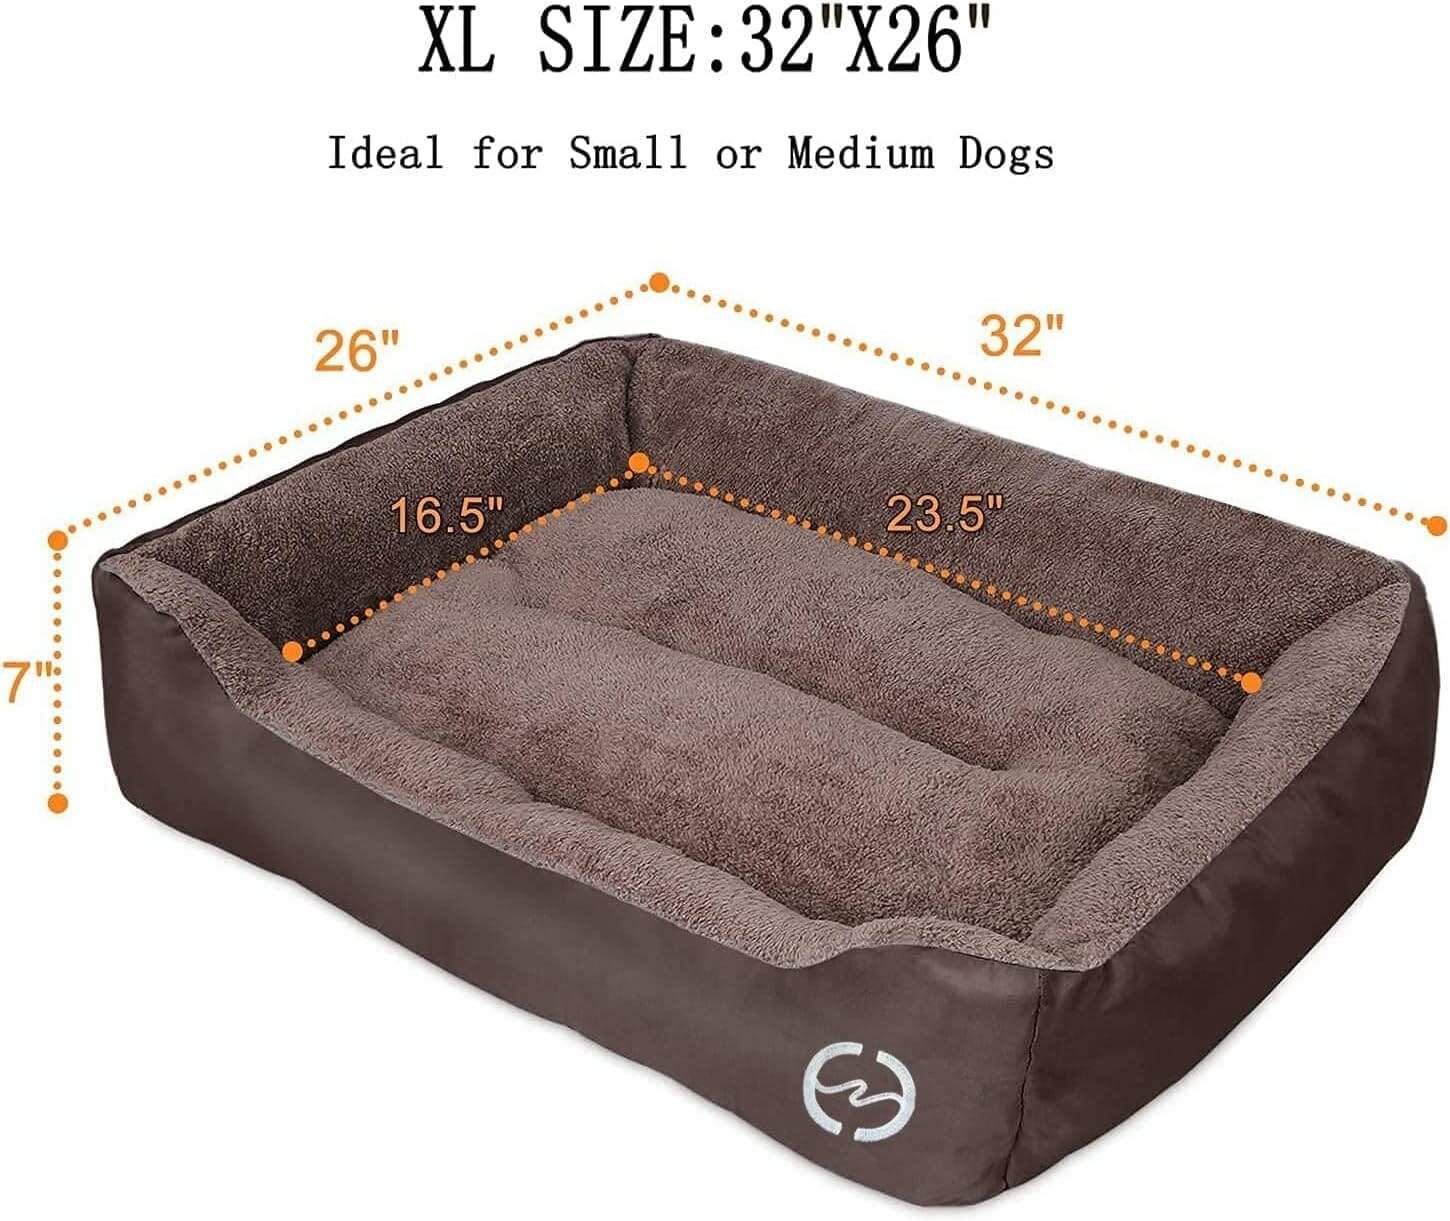 Cloudzone Dog Bed Review